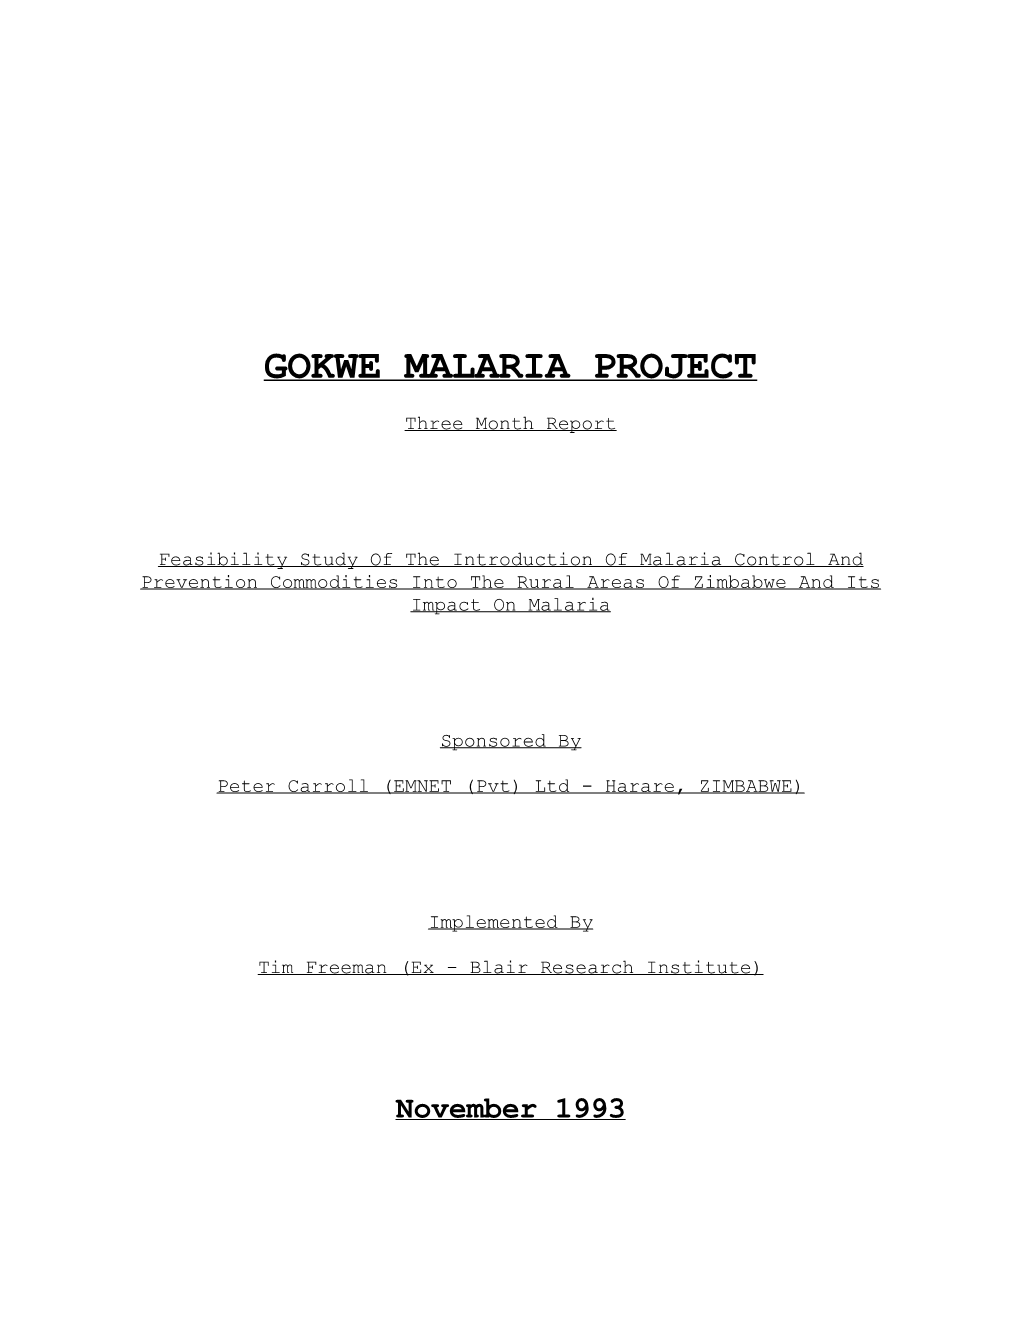 Feasibility Study of the Introduction of Malaria Control And